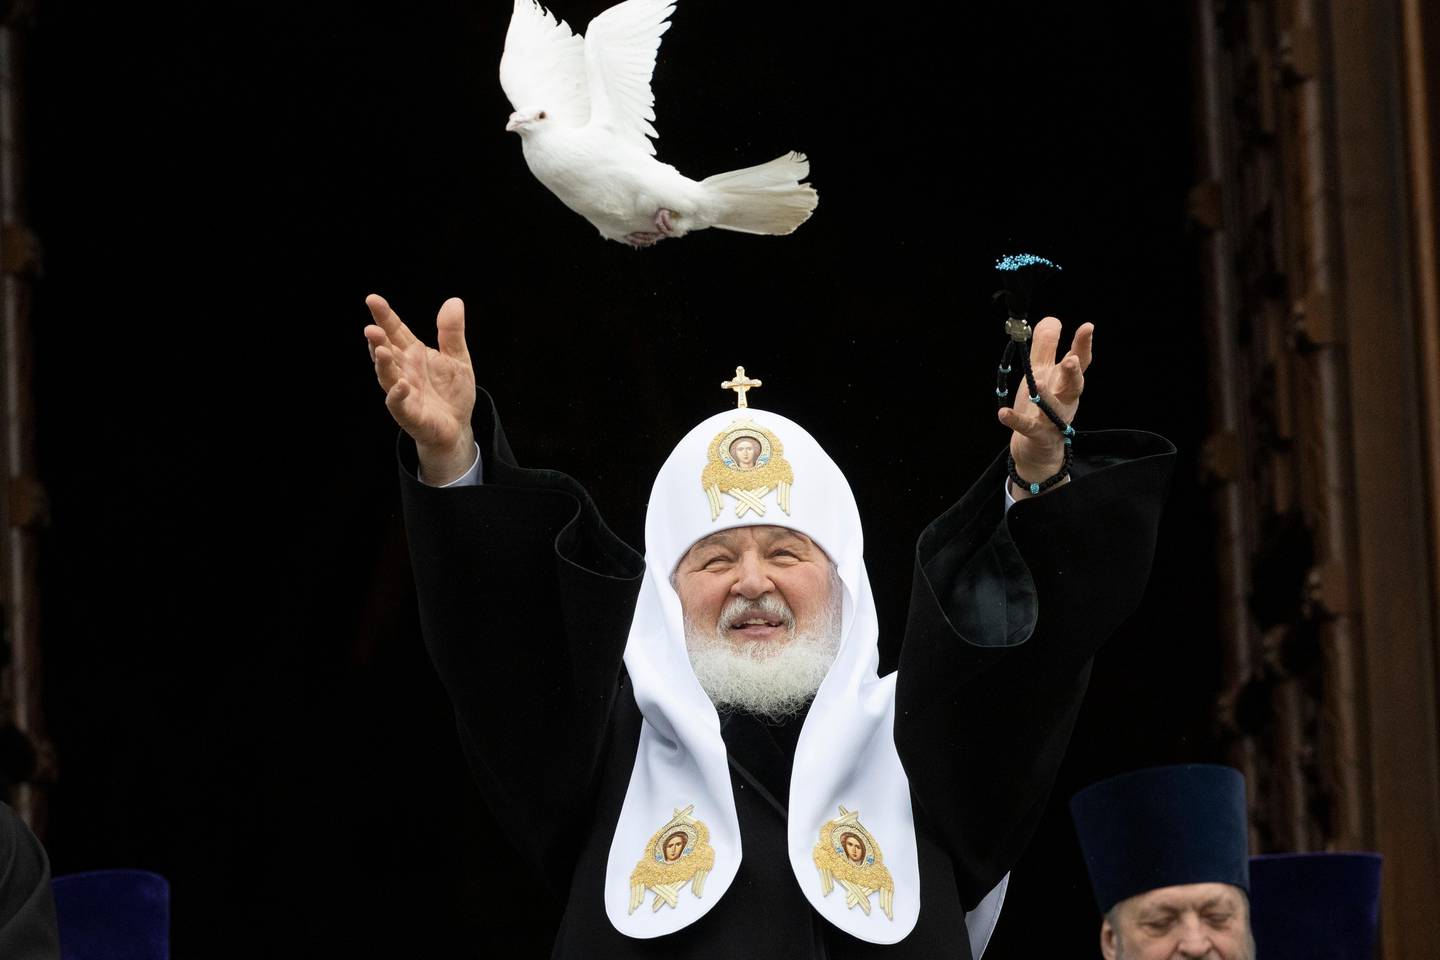 Russian Orthodox Church Patriarch Kirill releases a bird celebrating the Annunciatio on the eve of Orthodox Easter during a live broadcast outside the almost empty Christ the Savior Cathedral in Moscow, Russia, Tuesday, April 7, 2020. As the coronavirus outbreak picked up speed in Russia, authorities all over the country cancelled public events and ordered residents in most regions to stay home, with the exception of grocery shopping, going to pharmacies or taking out trash. Eastern Orthodox churches, which observe the ancient Julian calendar, usually celebrate Easter later than Western churches. (AP Photo/Alexander Zemlianichenko)